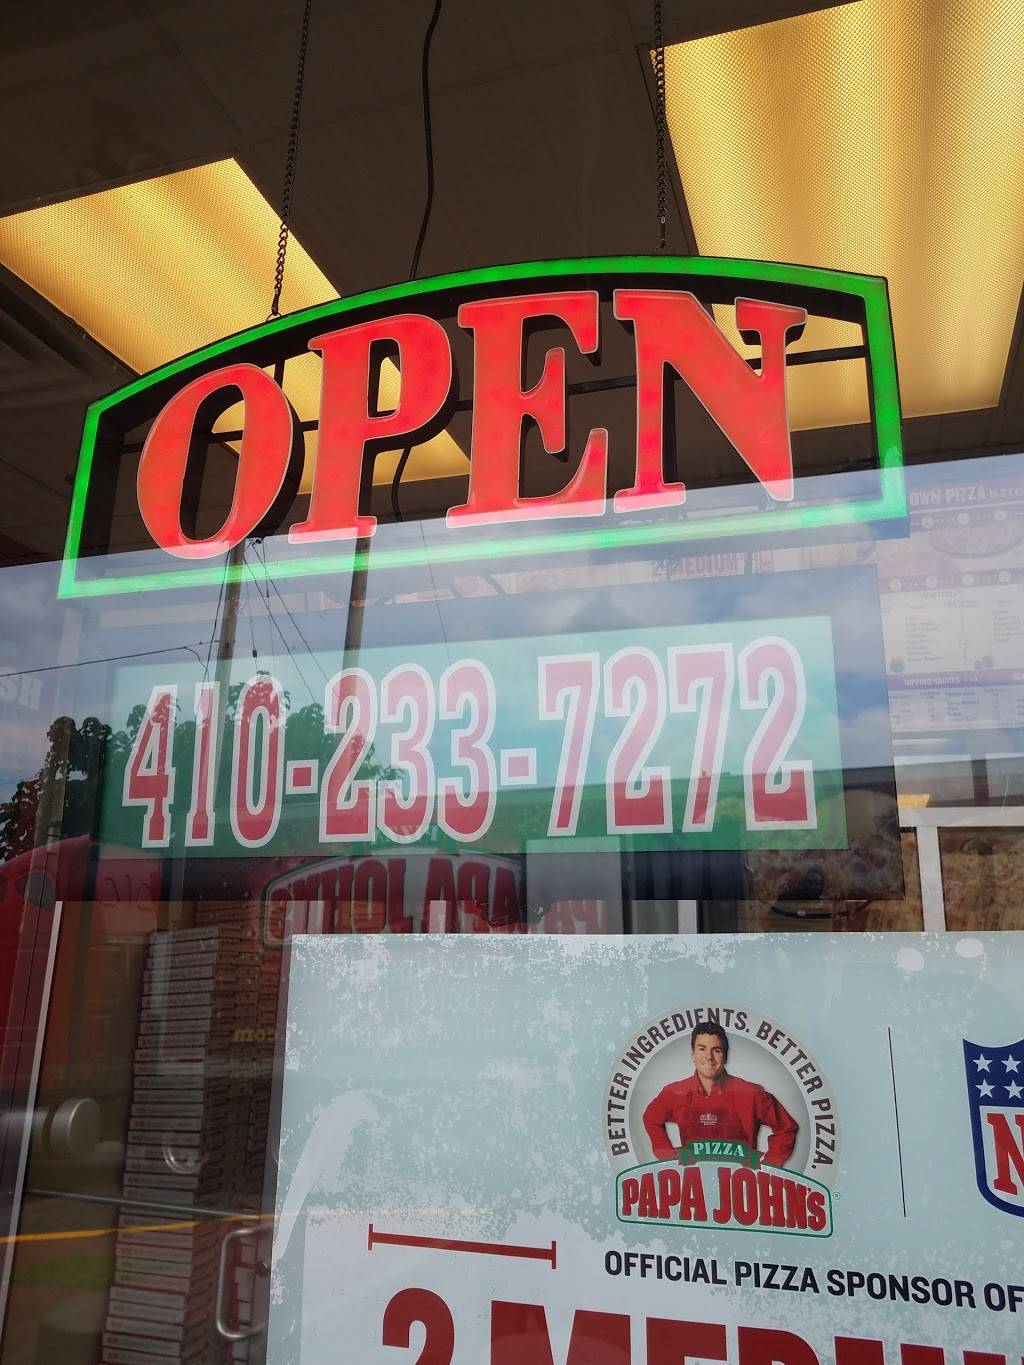 Papa Johns Pizza | 3411 Clifton Ave, Baltimore, MD 21216 | Phone: (410) 233-7272